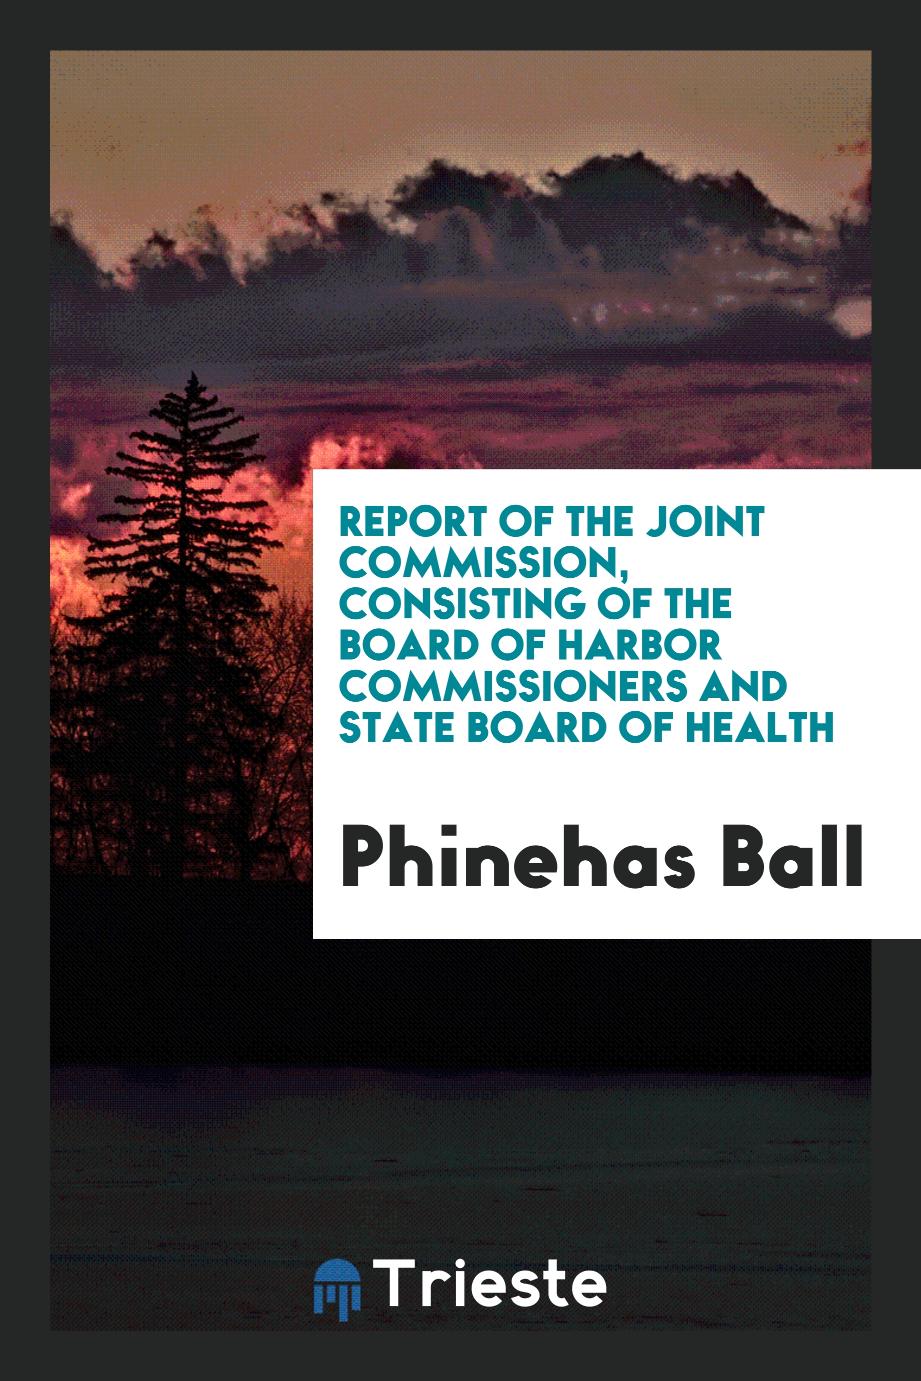 Report of the Joint Commission, consisting of the Board of Harbor Commissioners and State Board of health